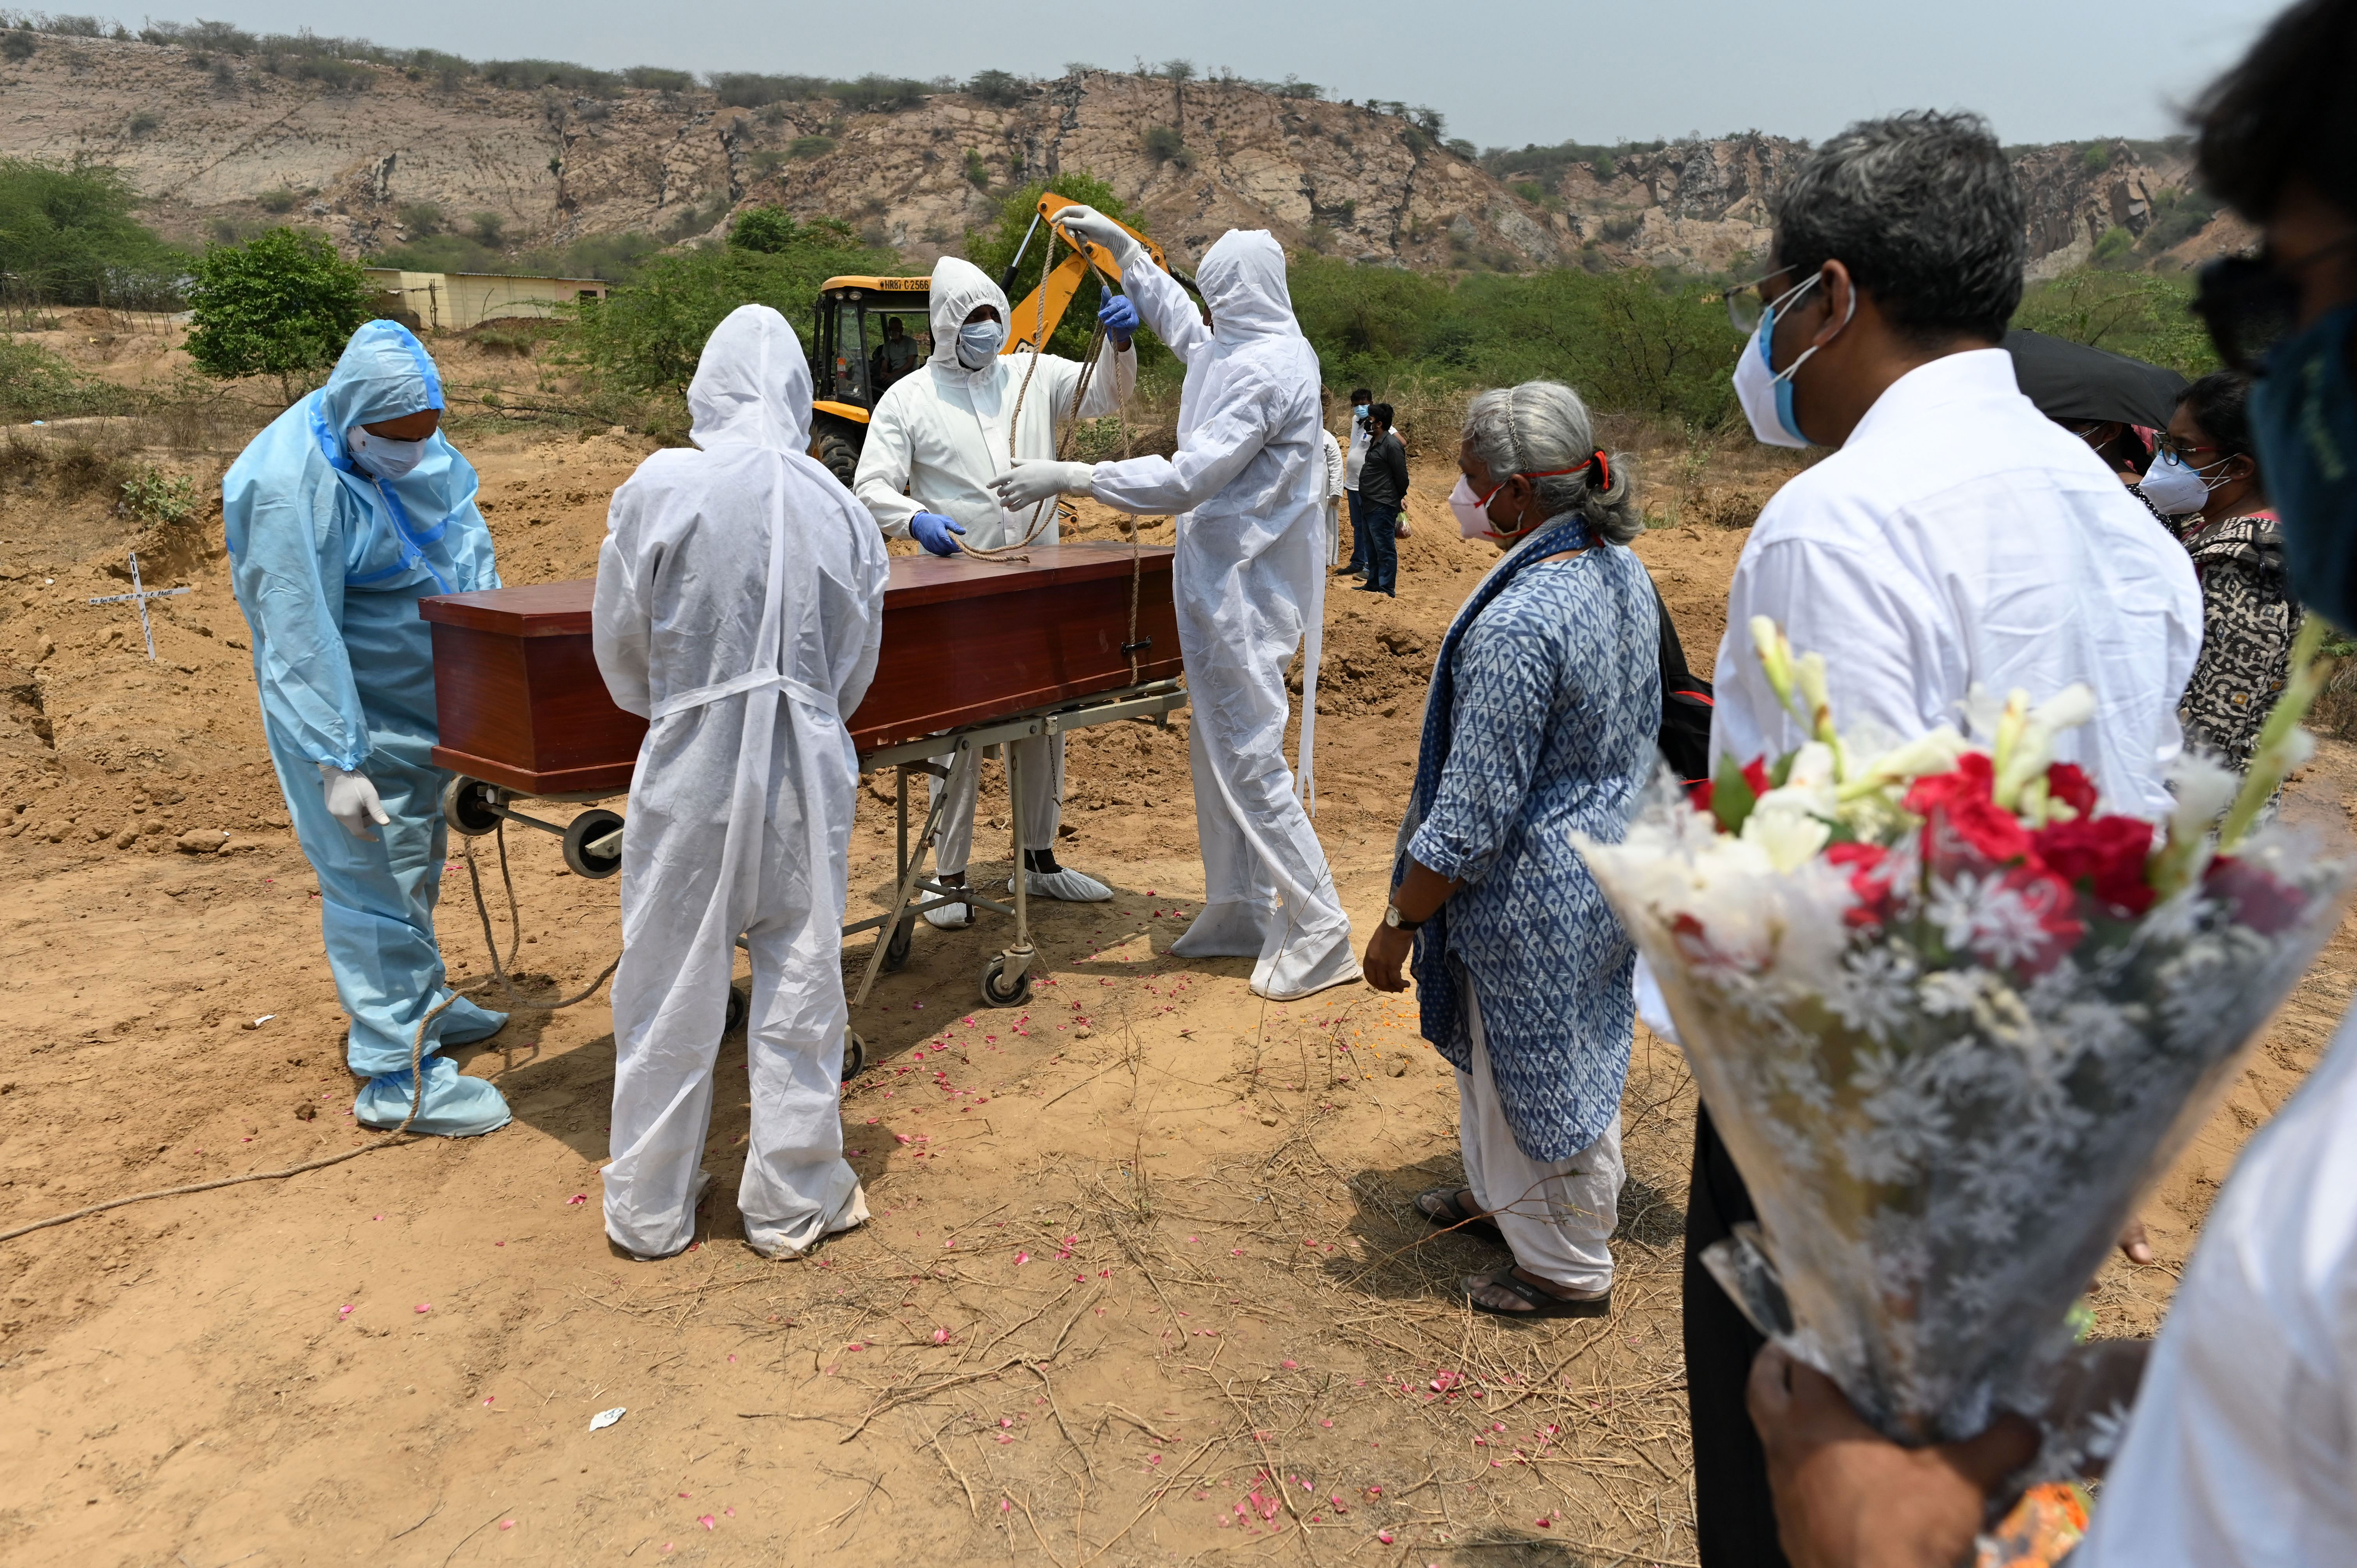 Ambulance service employees seal the coffin of a Covid-19 victim before burial at a cemetery in the village of Pali, near Faridabad, in India on May 8.